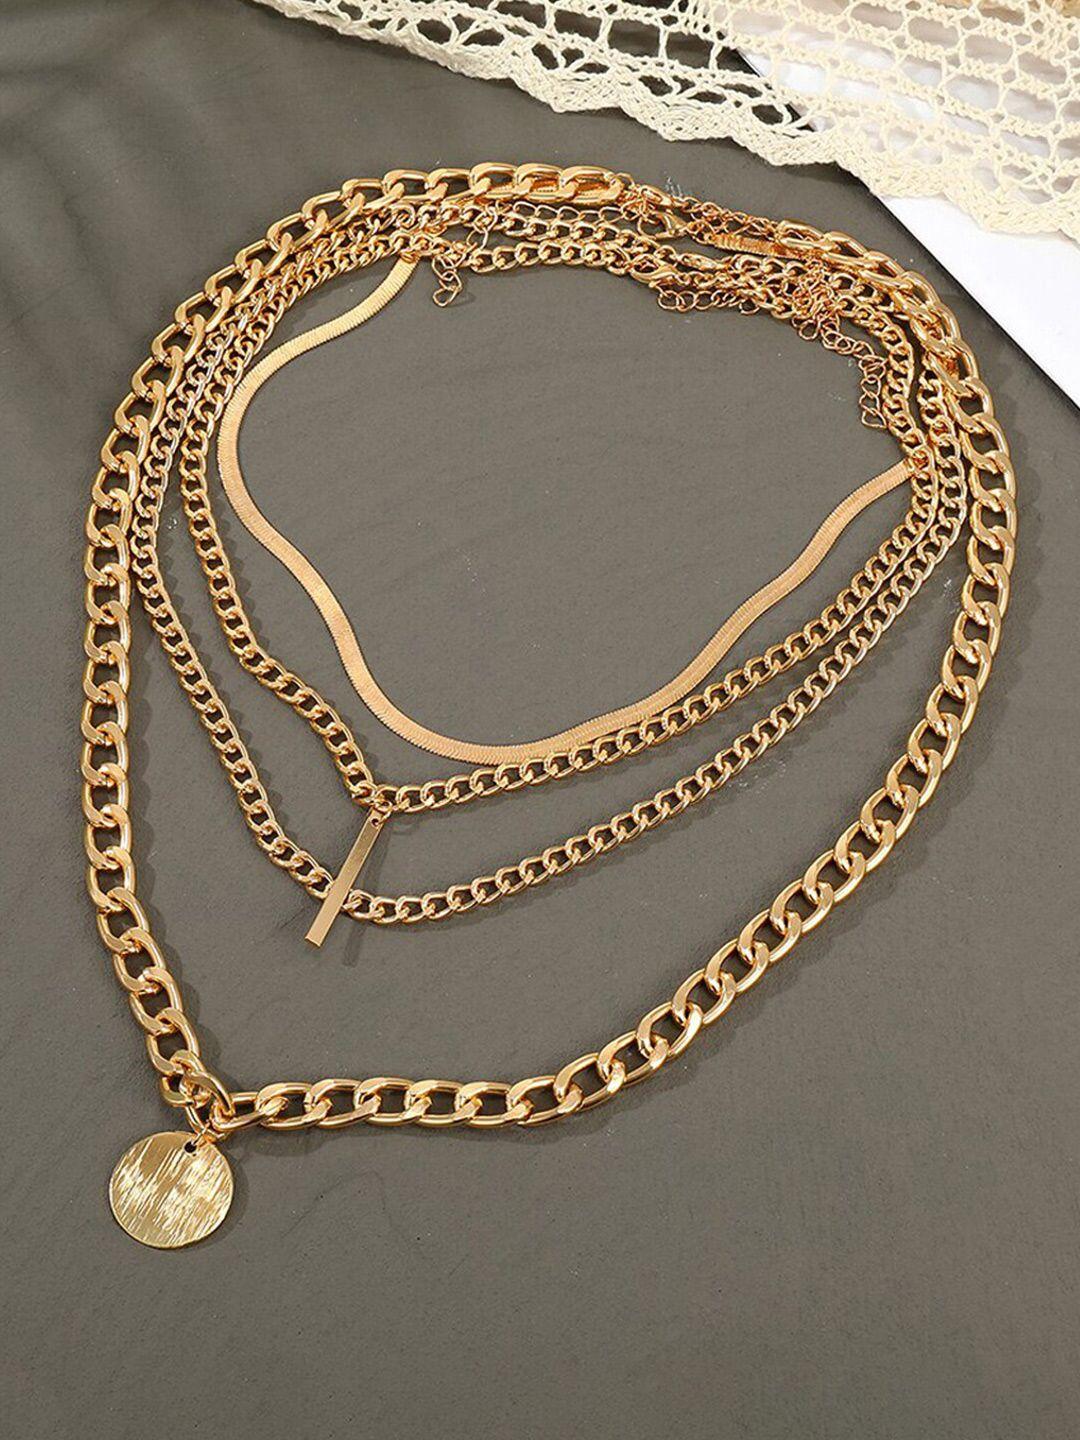 jewels galaxy 4pcs gold-plated necklace